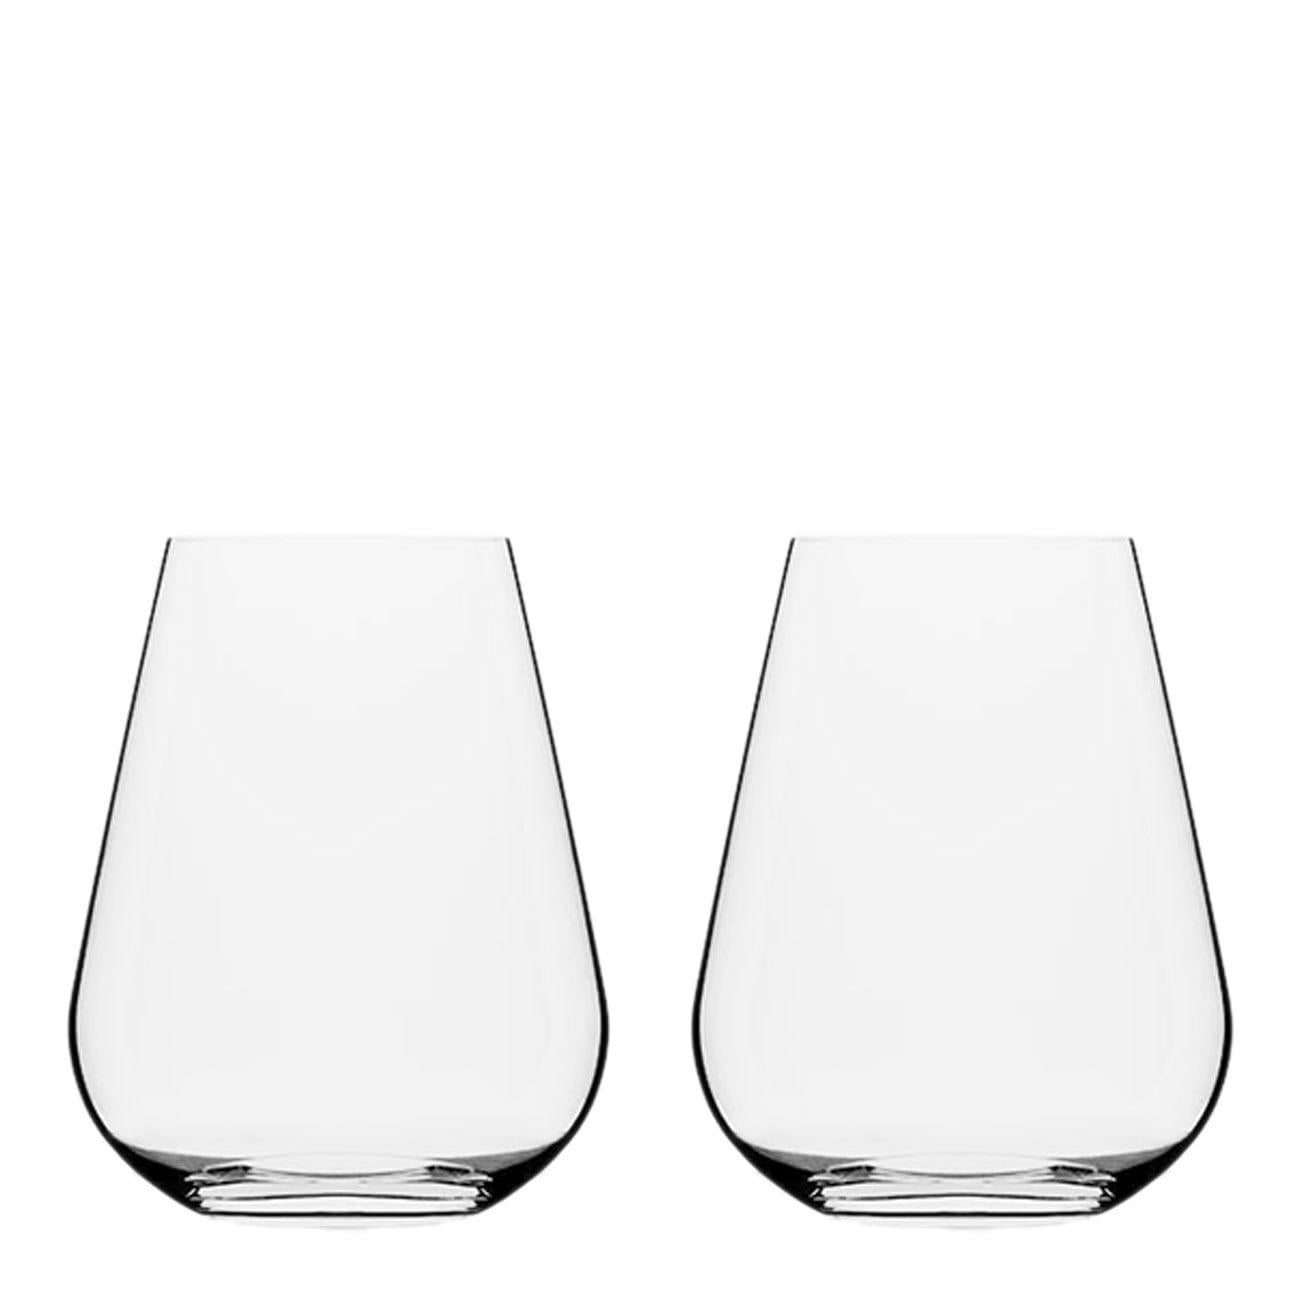 Set of Water Glasses by Jancis Robinson